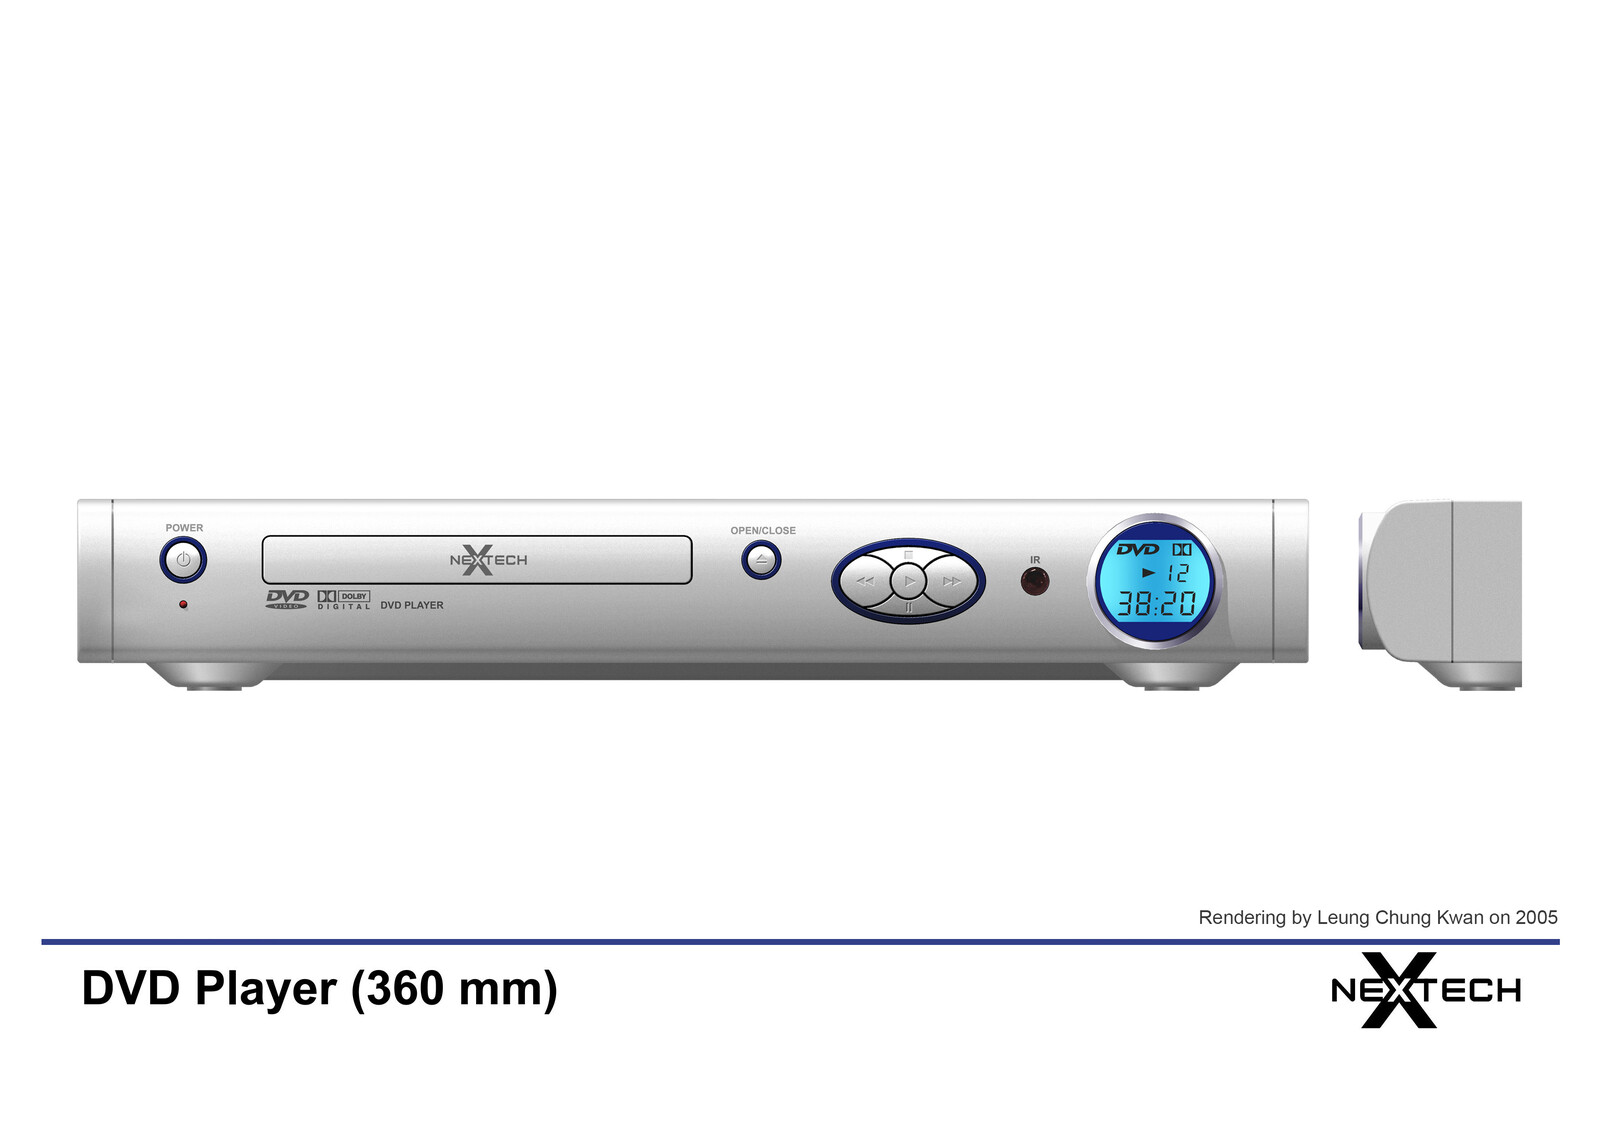 💎 DVD Player | Rendering by Leung Chung Kwan on 2005 💎
Brand Name︰NEXTECH | Client︰Star Light Electronics Co., Ltd.